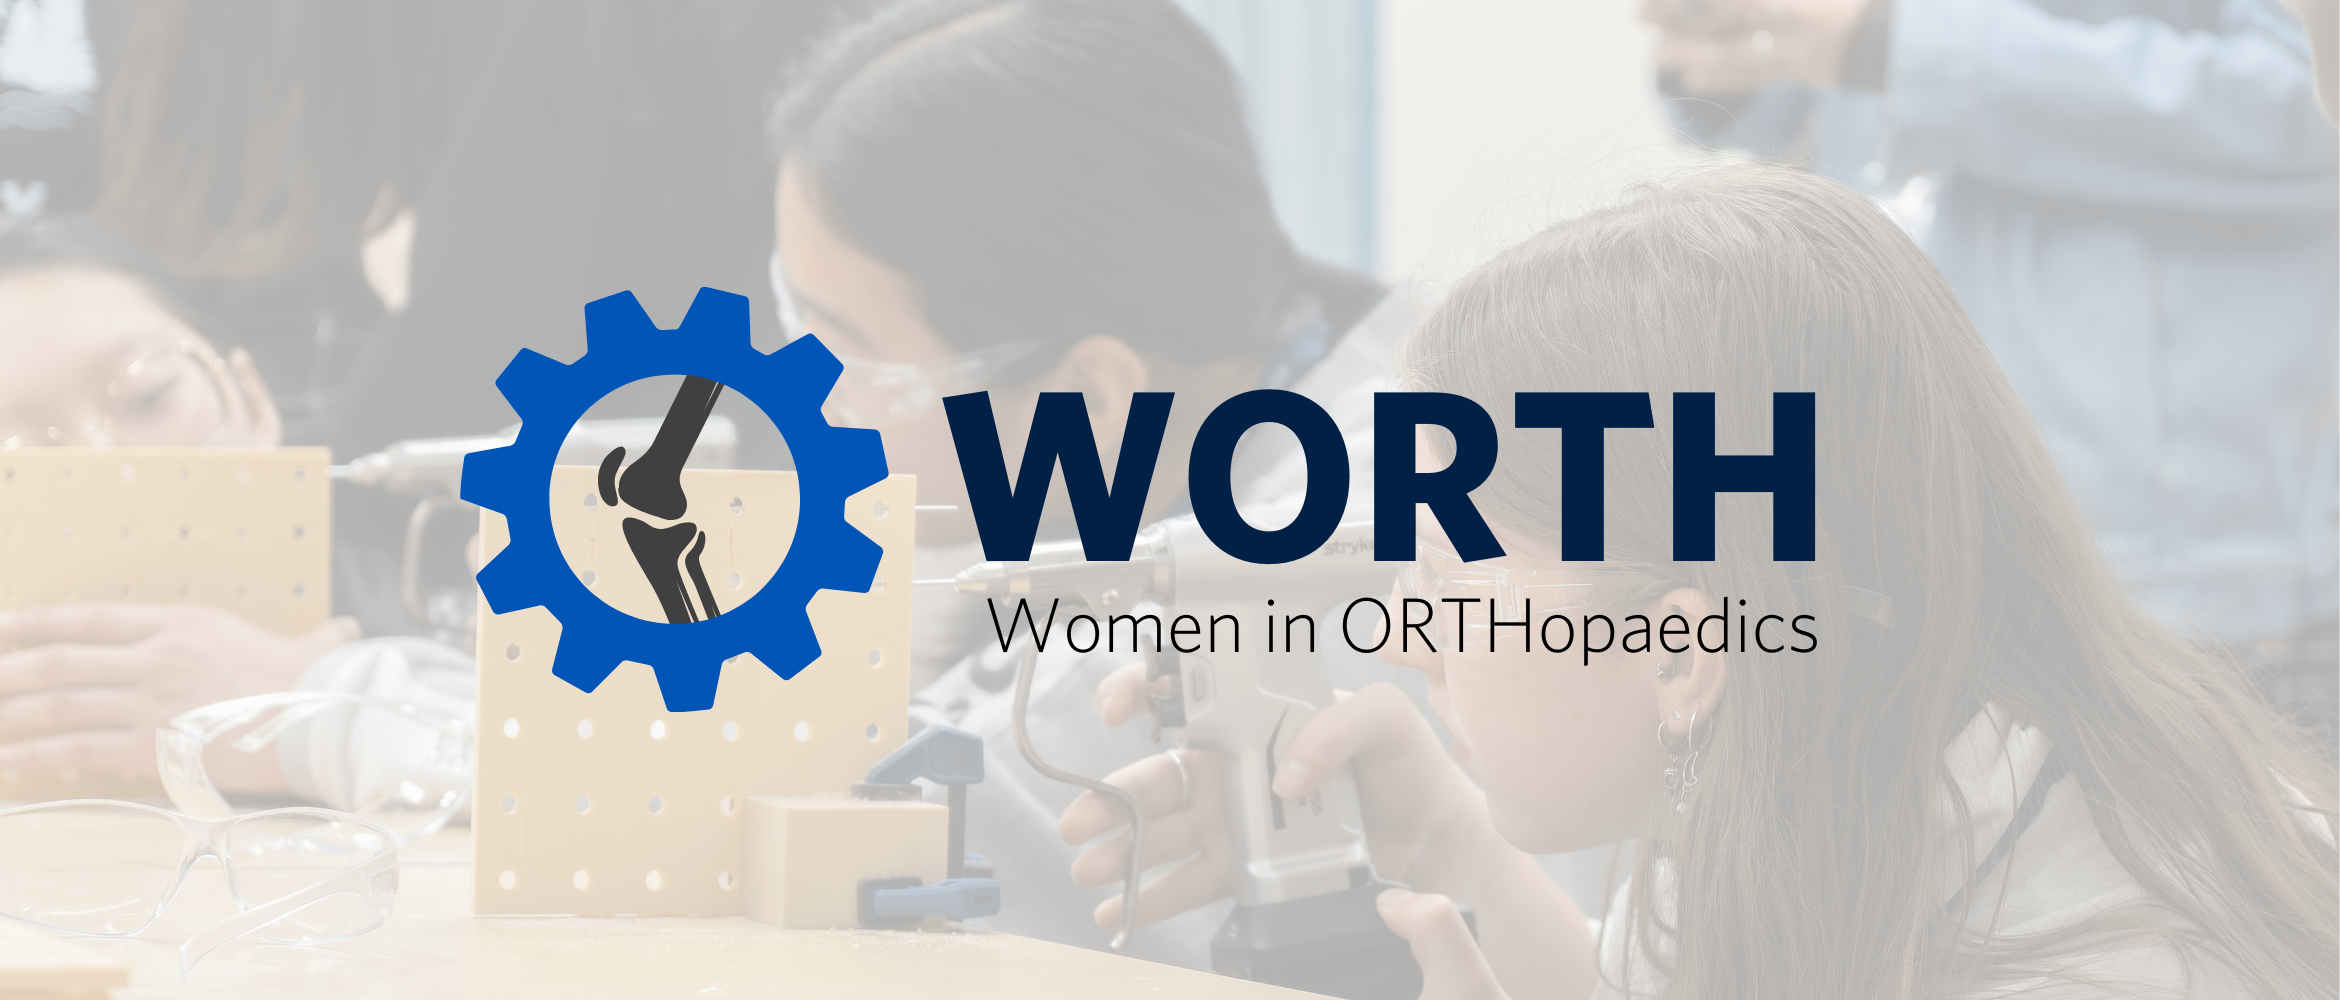 Registration now Open! Women in Orthopaedics (WORTH) Workshop Hosted by UBC and BC Children’s Hospital